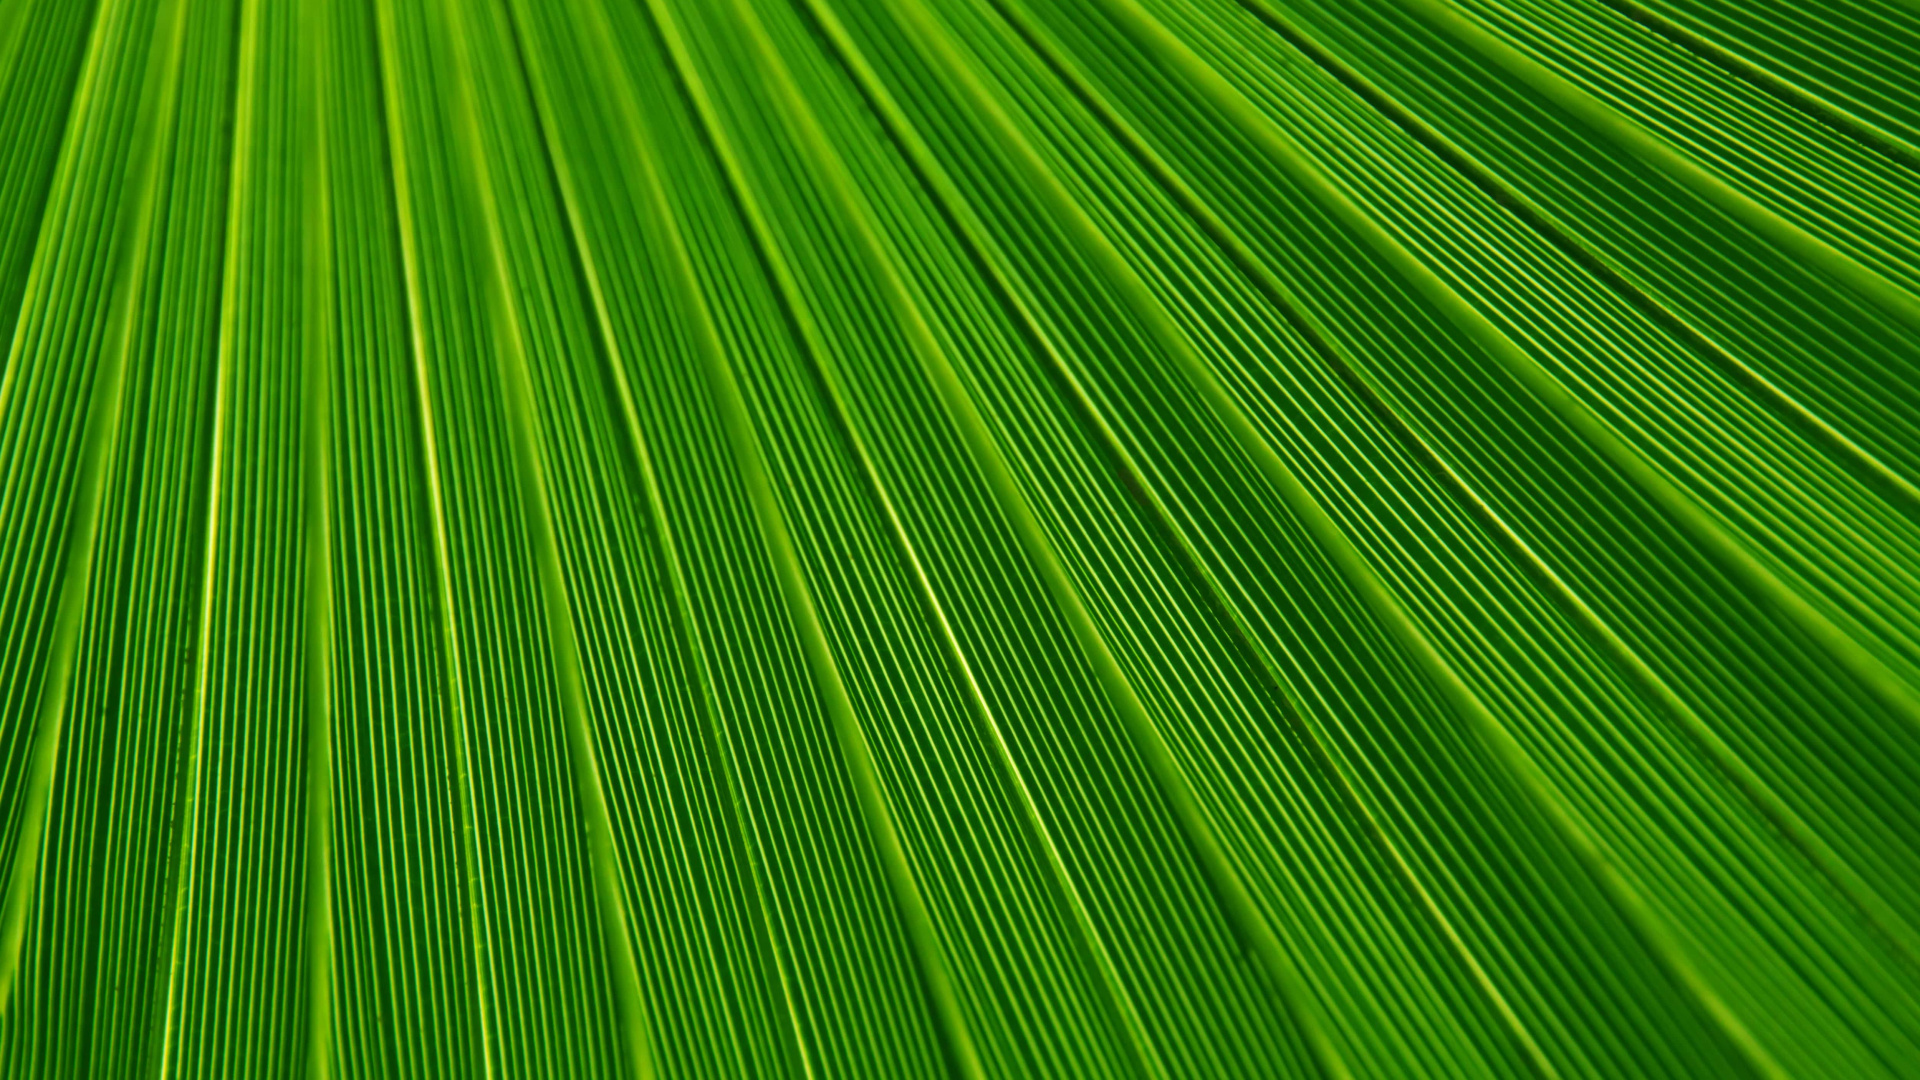 Green and Yellow Striped Textile. Wallpaper in 1920x1080 Resolution